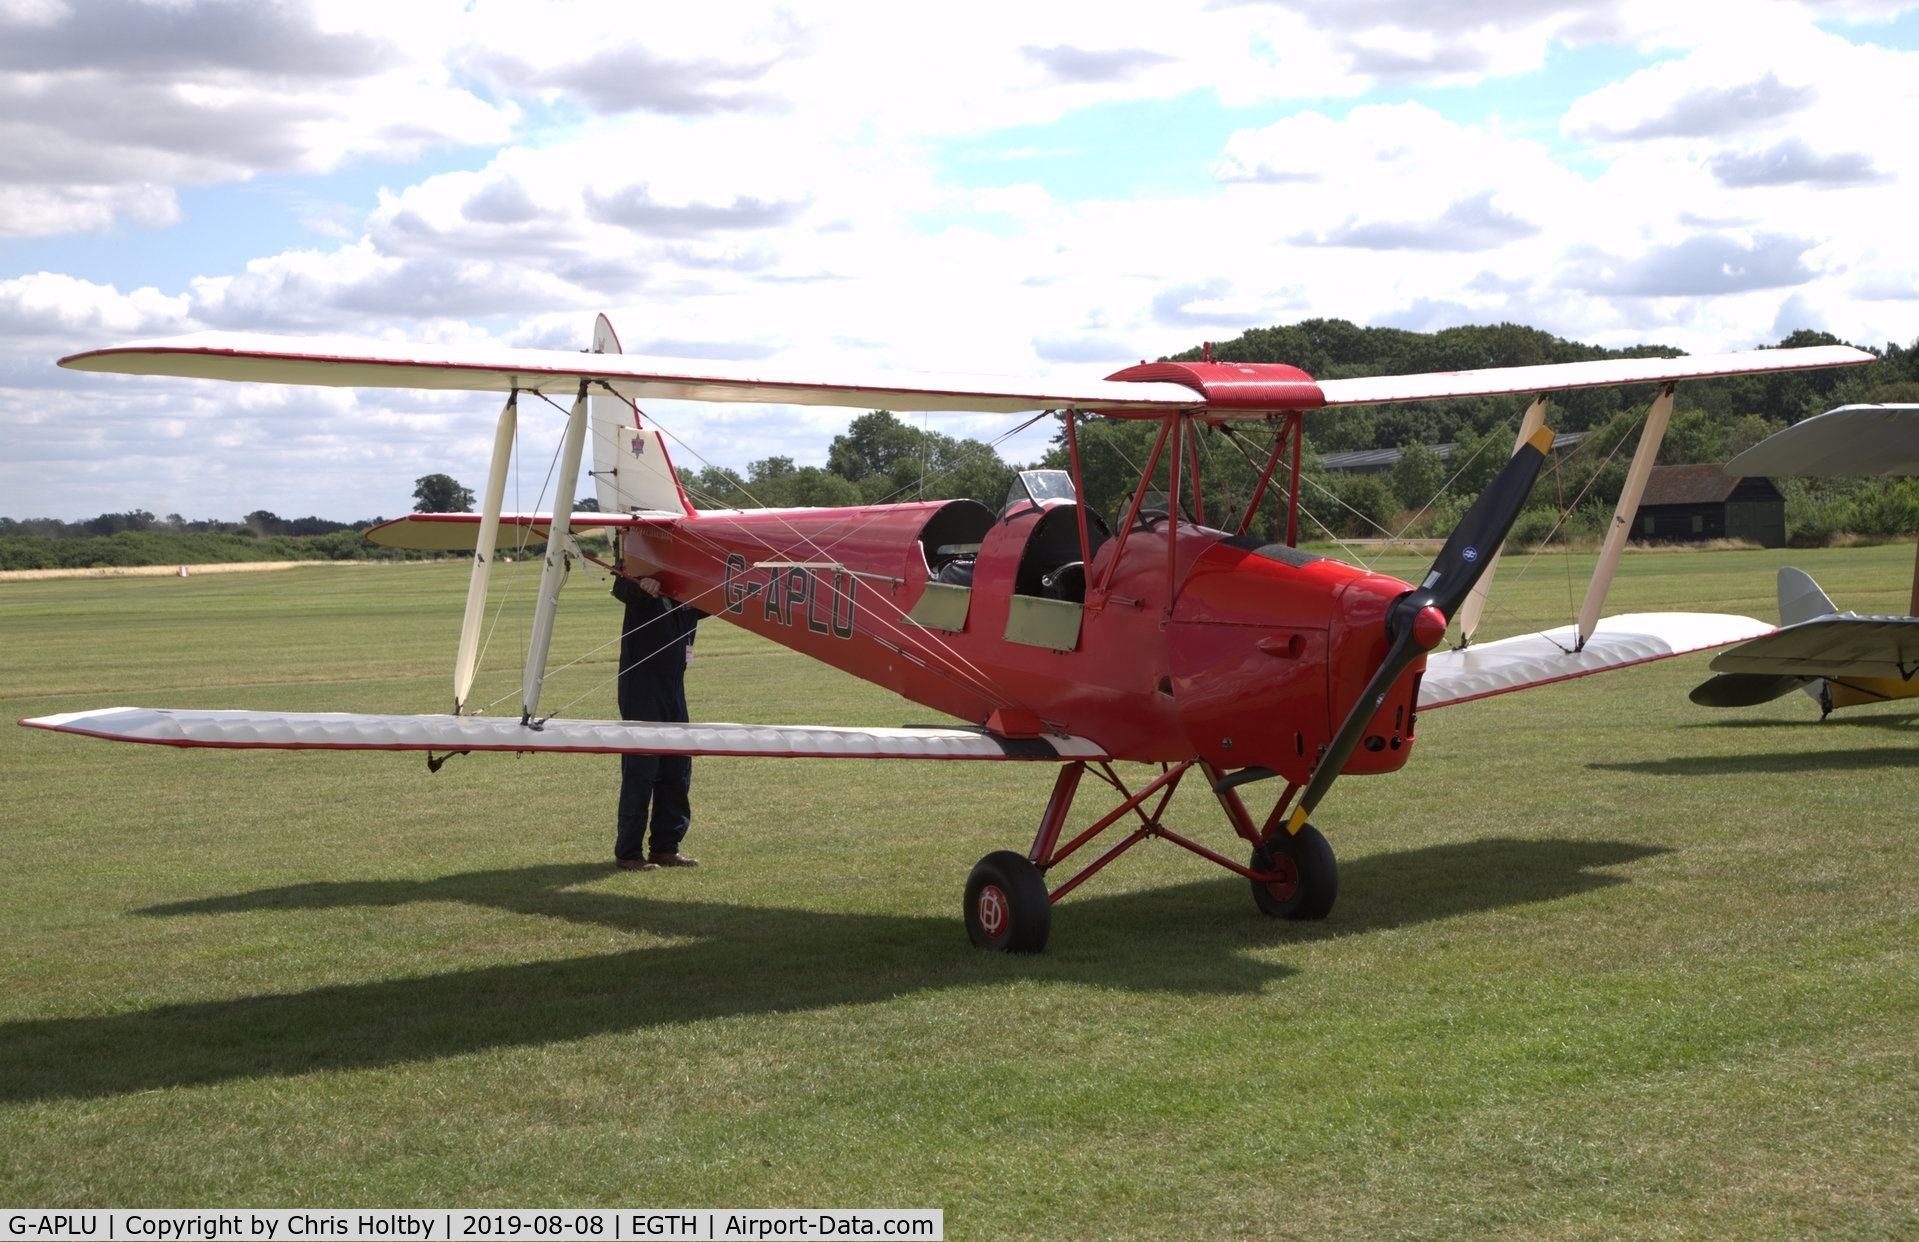 G-APLU, 1941 De Havilland DH-82A Tiger Moth II C/N 85094, 1941 Tiger Moth being manually lifted and turned for taxiing at the 'Gathering of Moths' Day 2019 at Old Warden